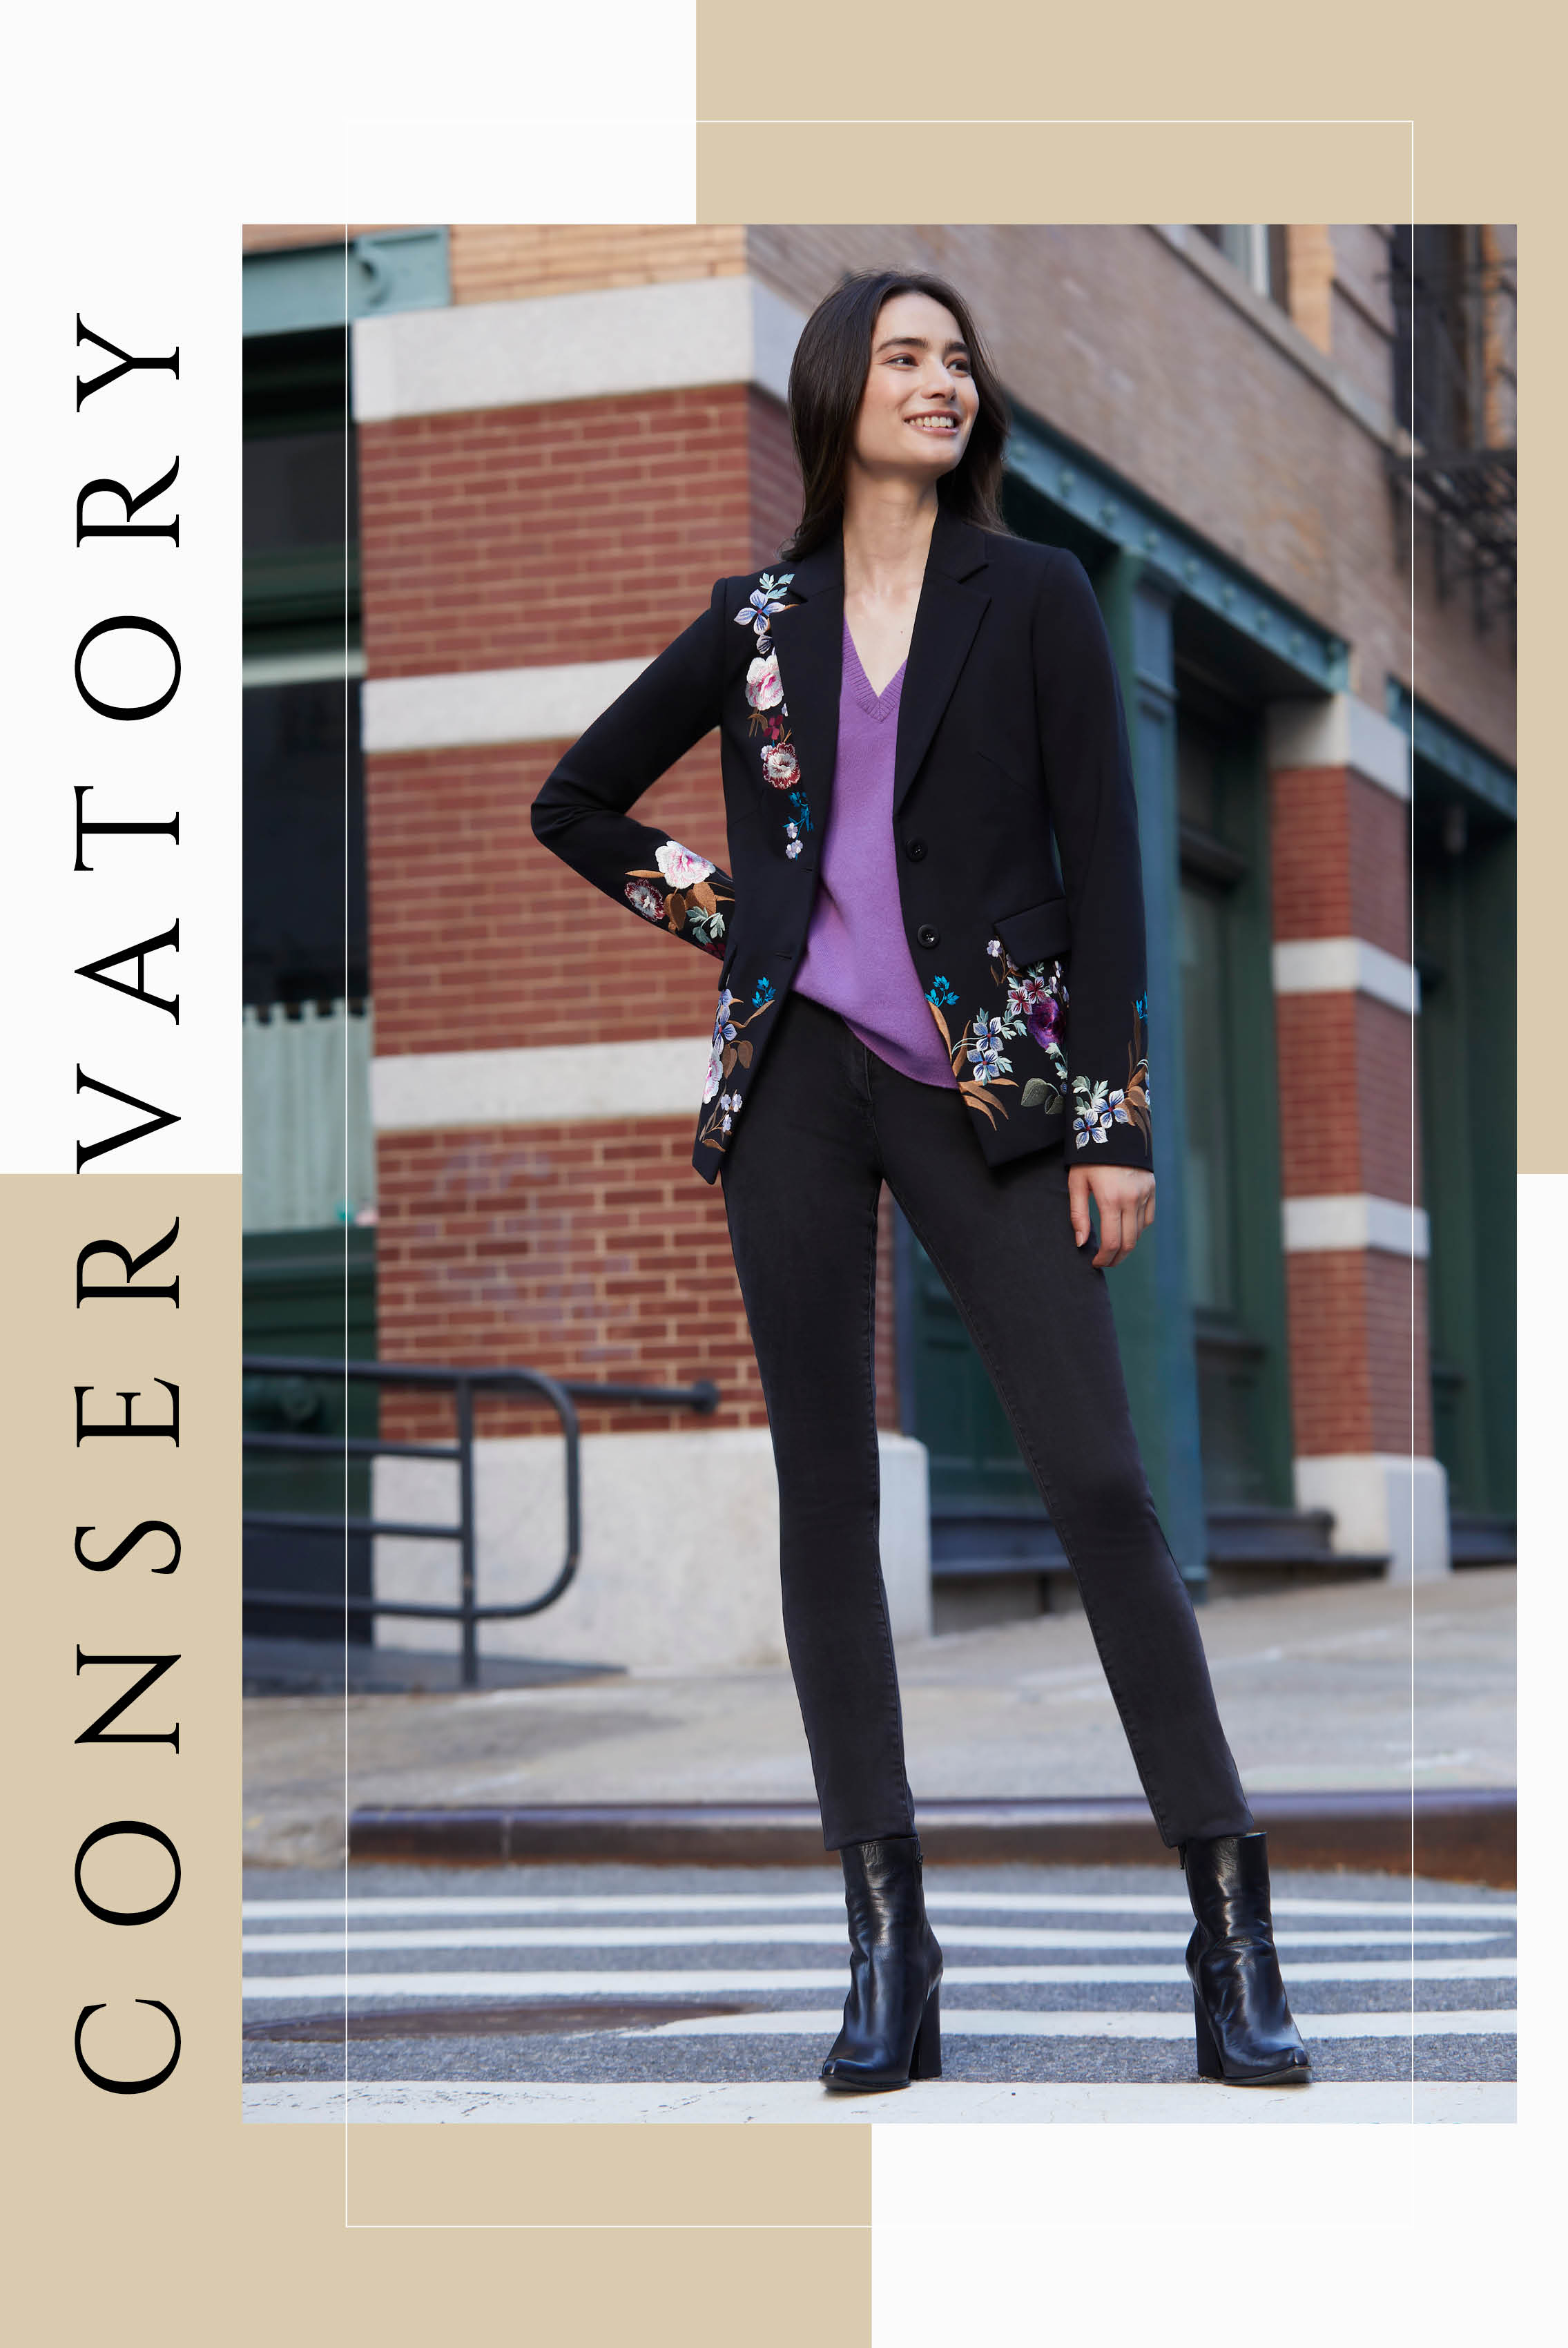 Dress magnificently in a black ponte knit tuxedo jacket with front and back couture floral embroidery in eight colors. Make the look more accessible with a purple feminine cashmere V-neck.